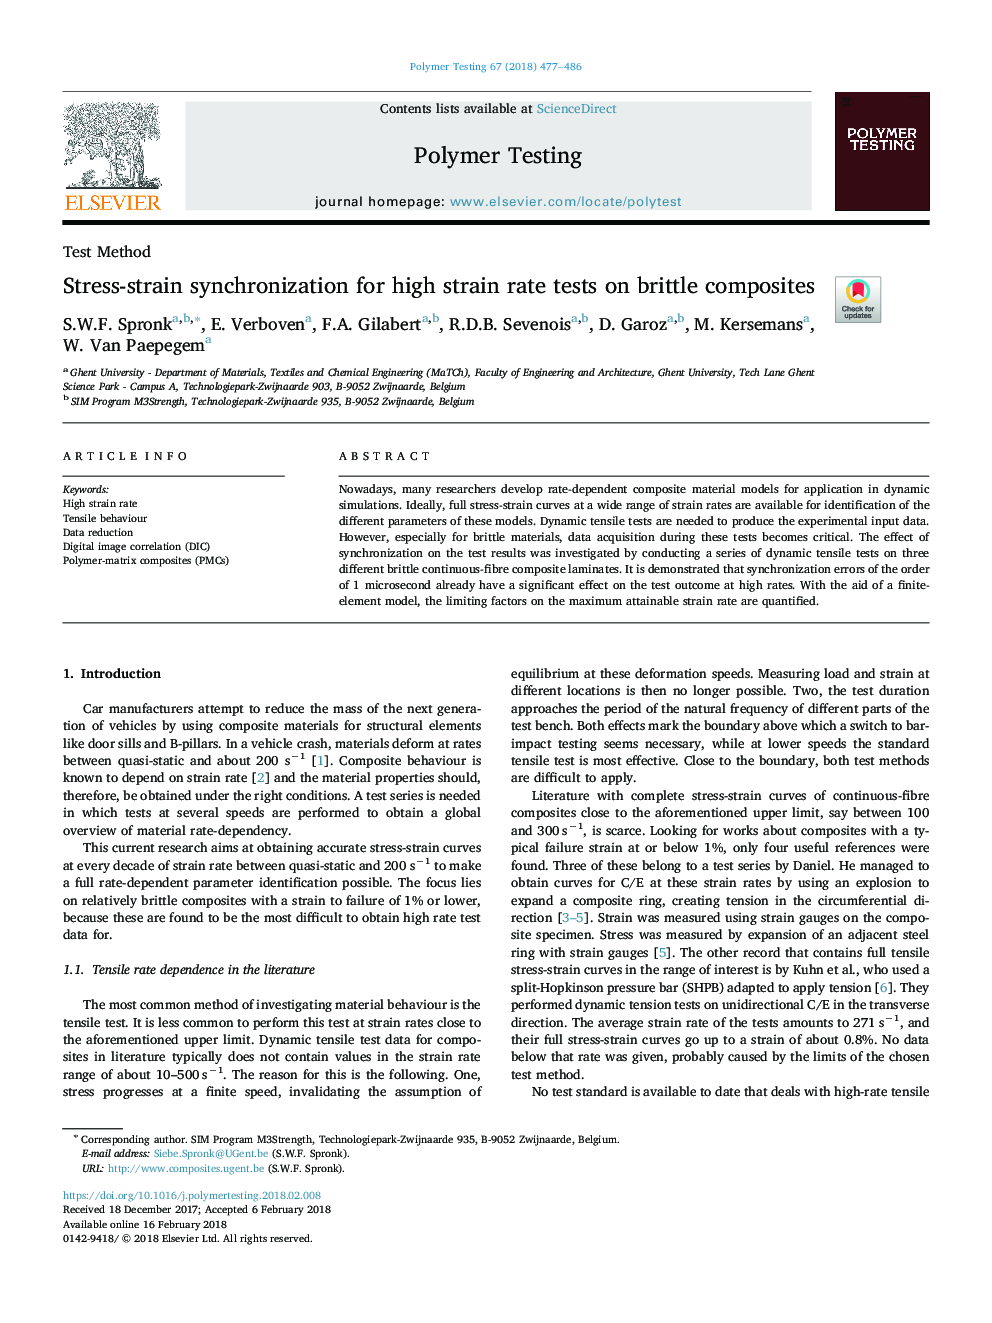 Stress-strain synchronization for high strain rate tests on brittle composites